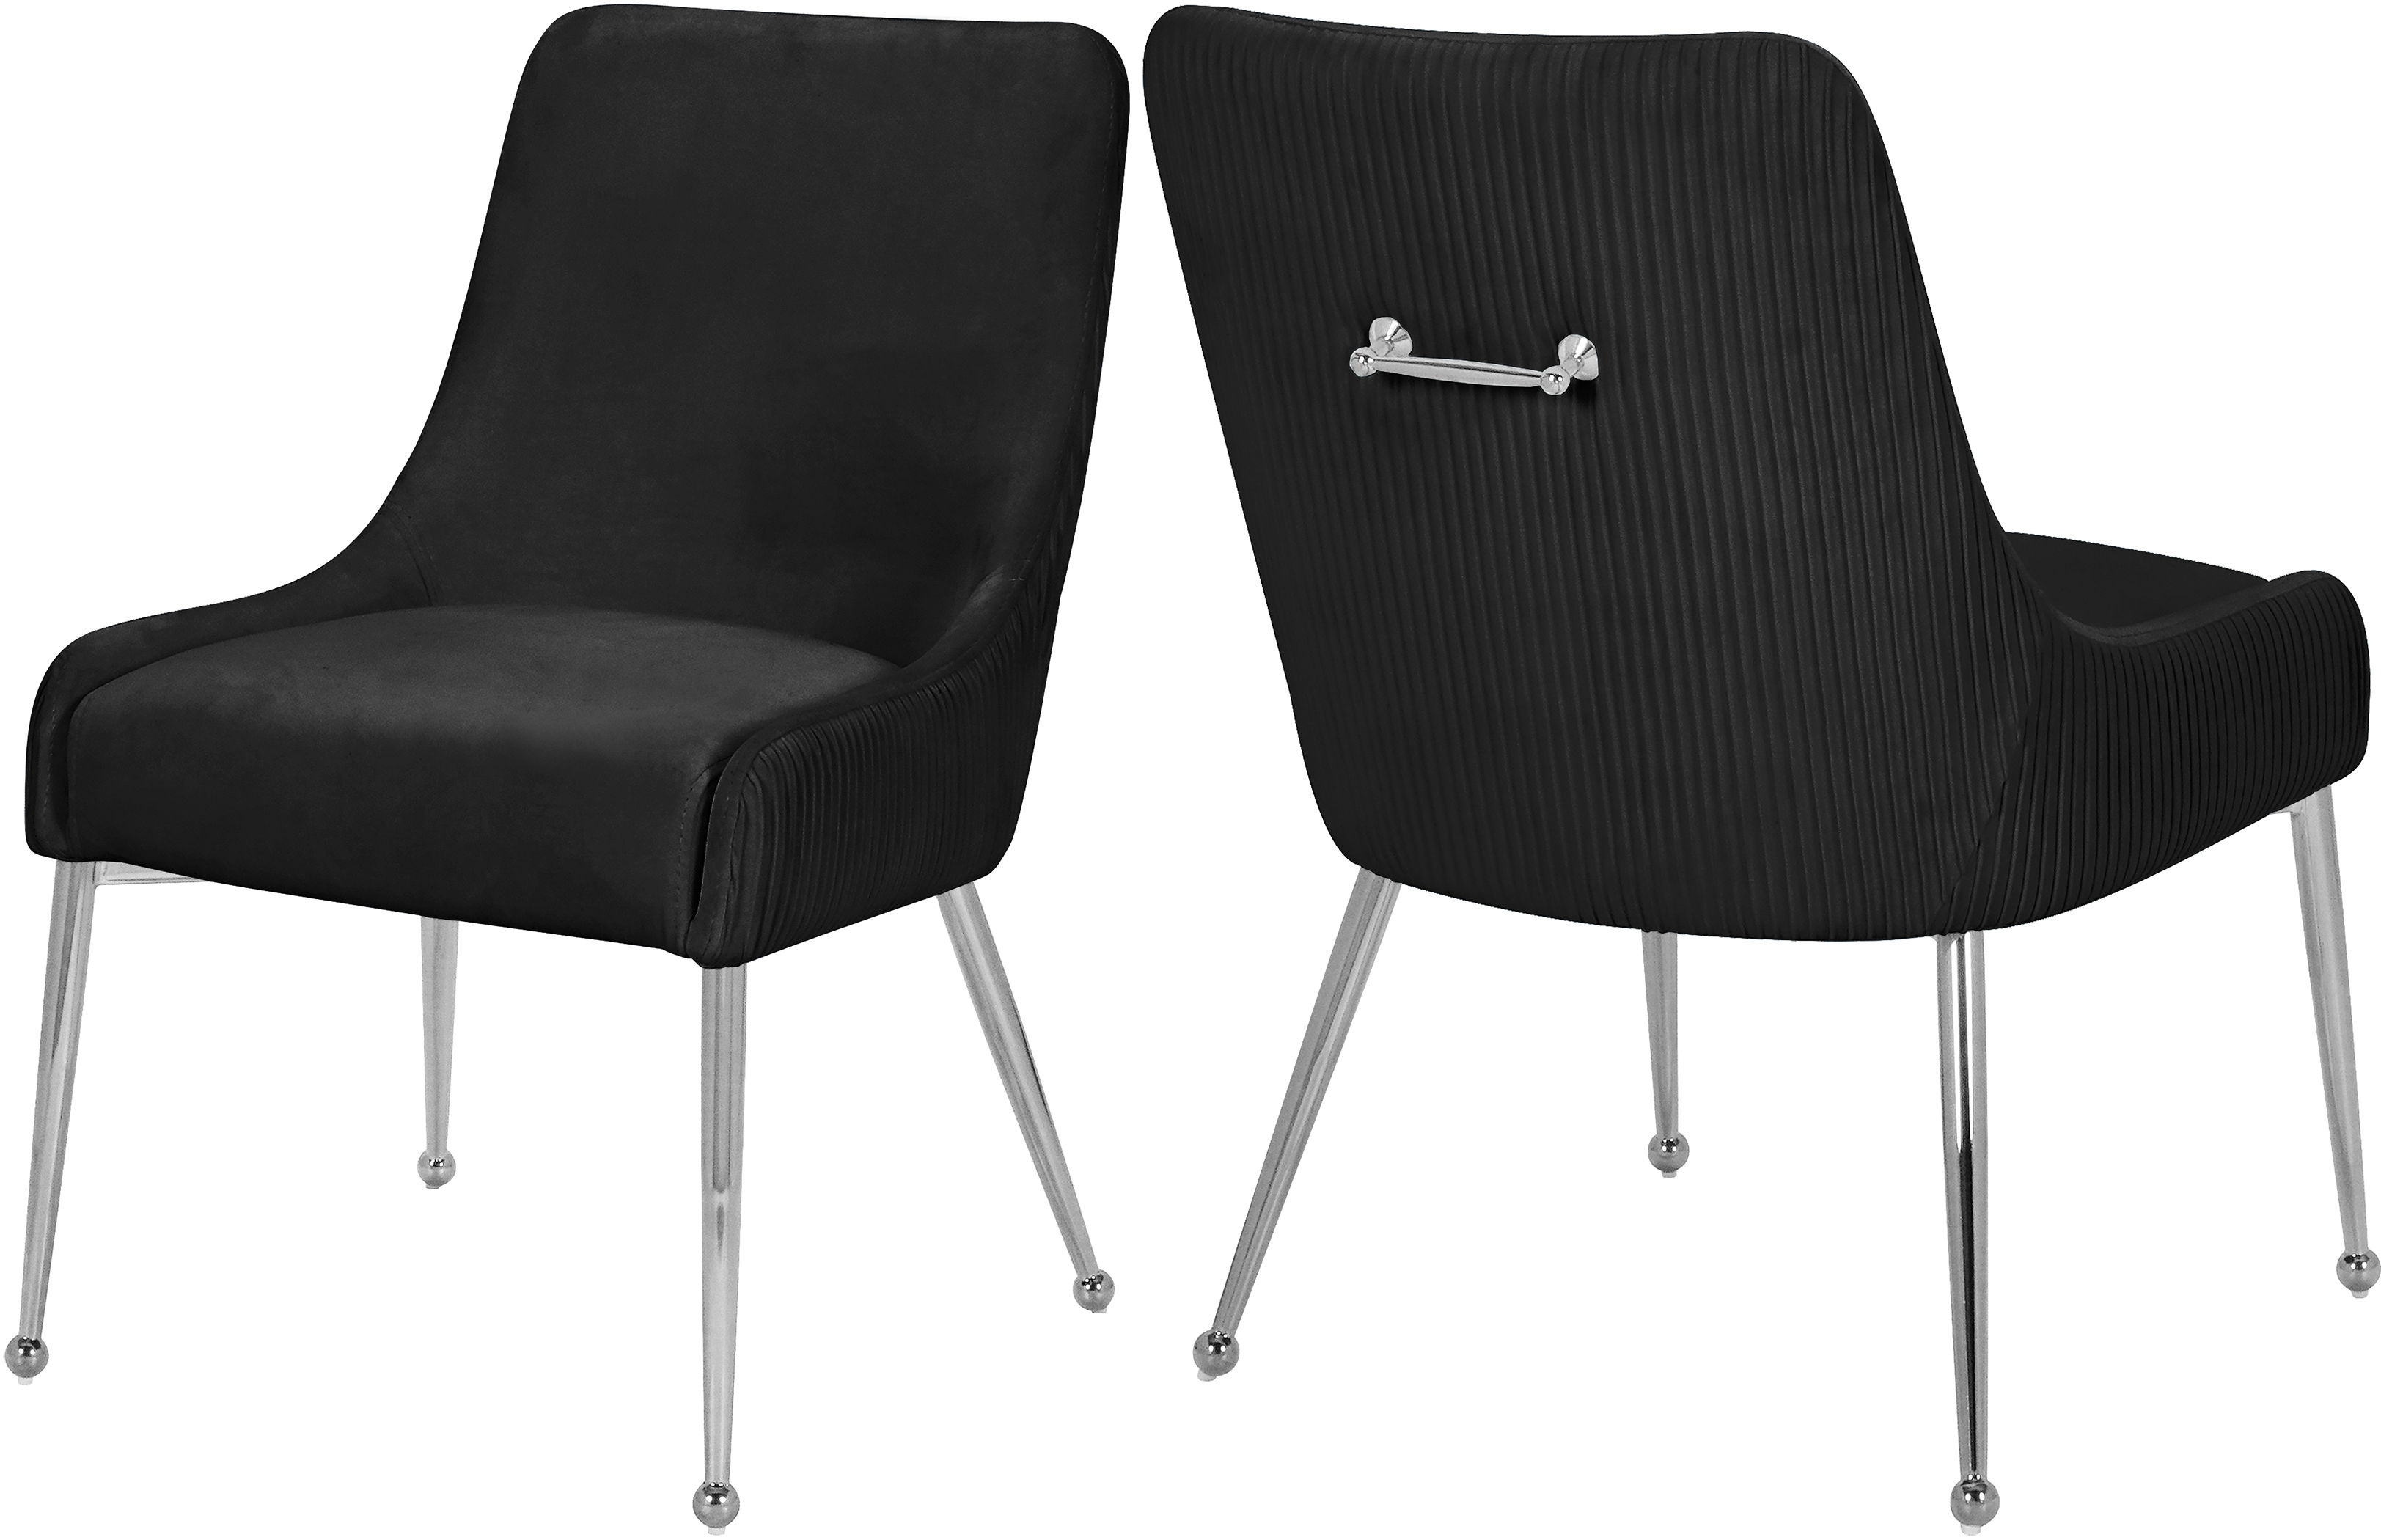 Ace - Dining Chair (Set of 2) - Black - Fabric